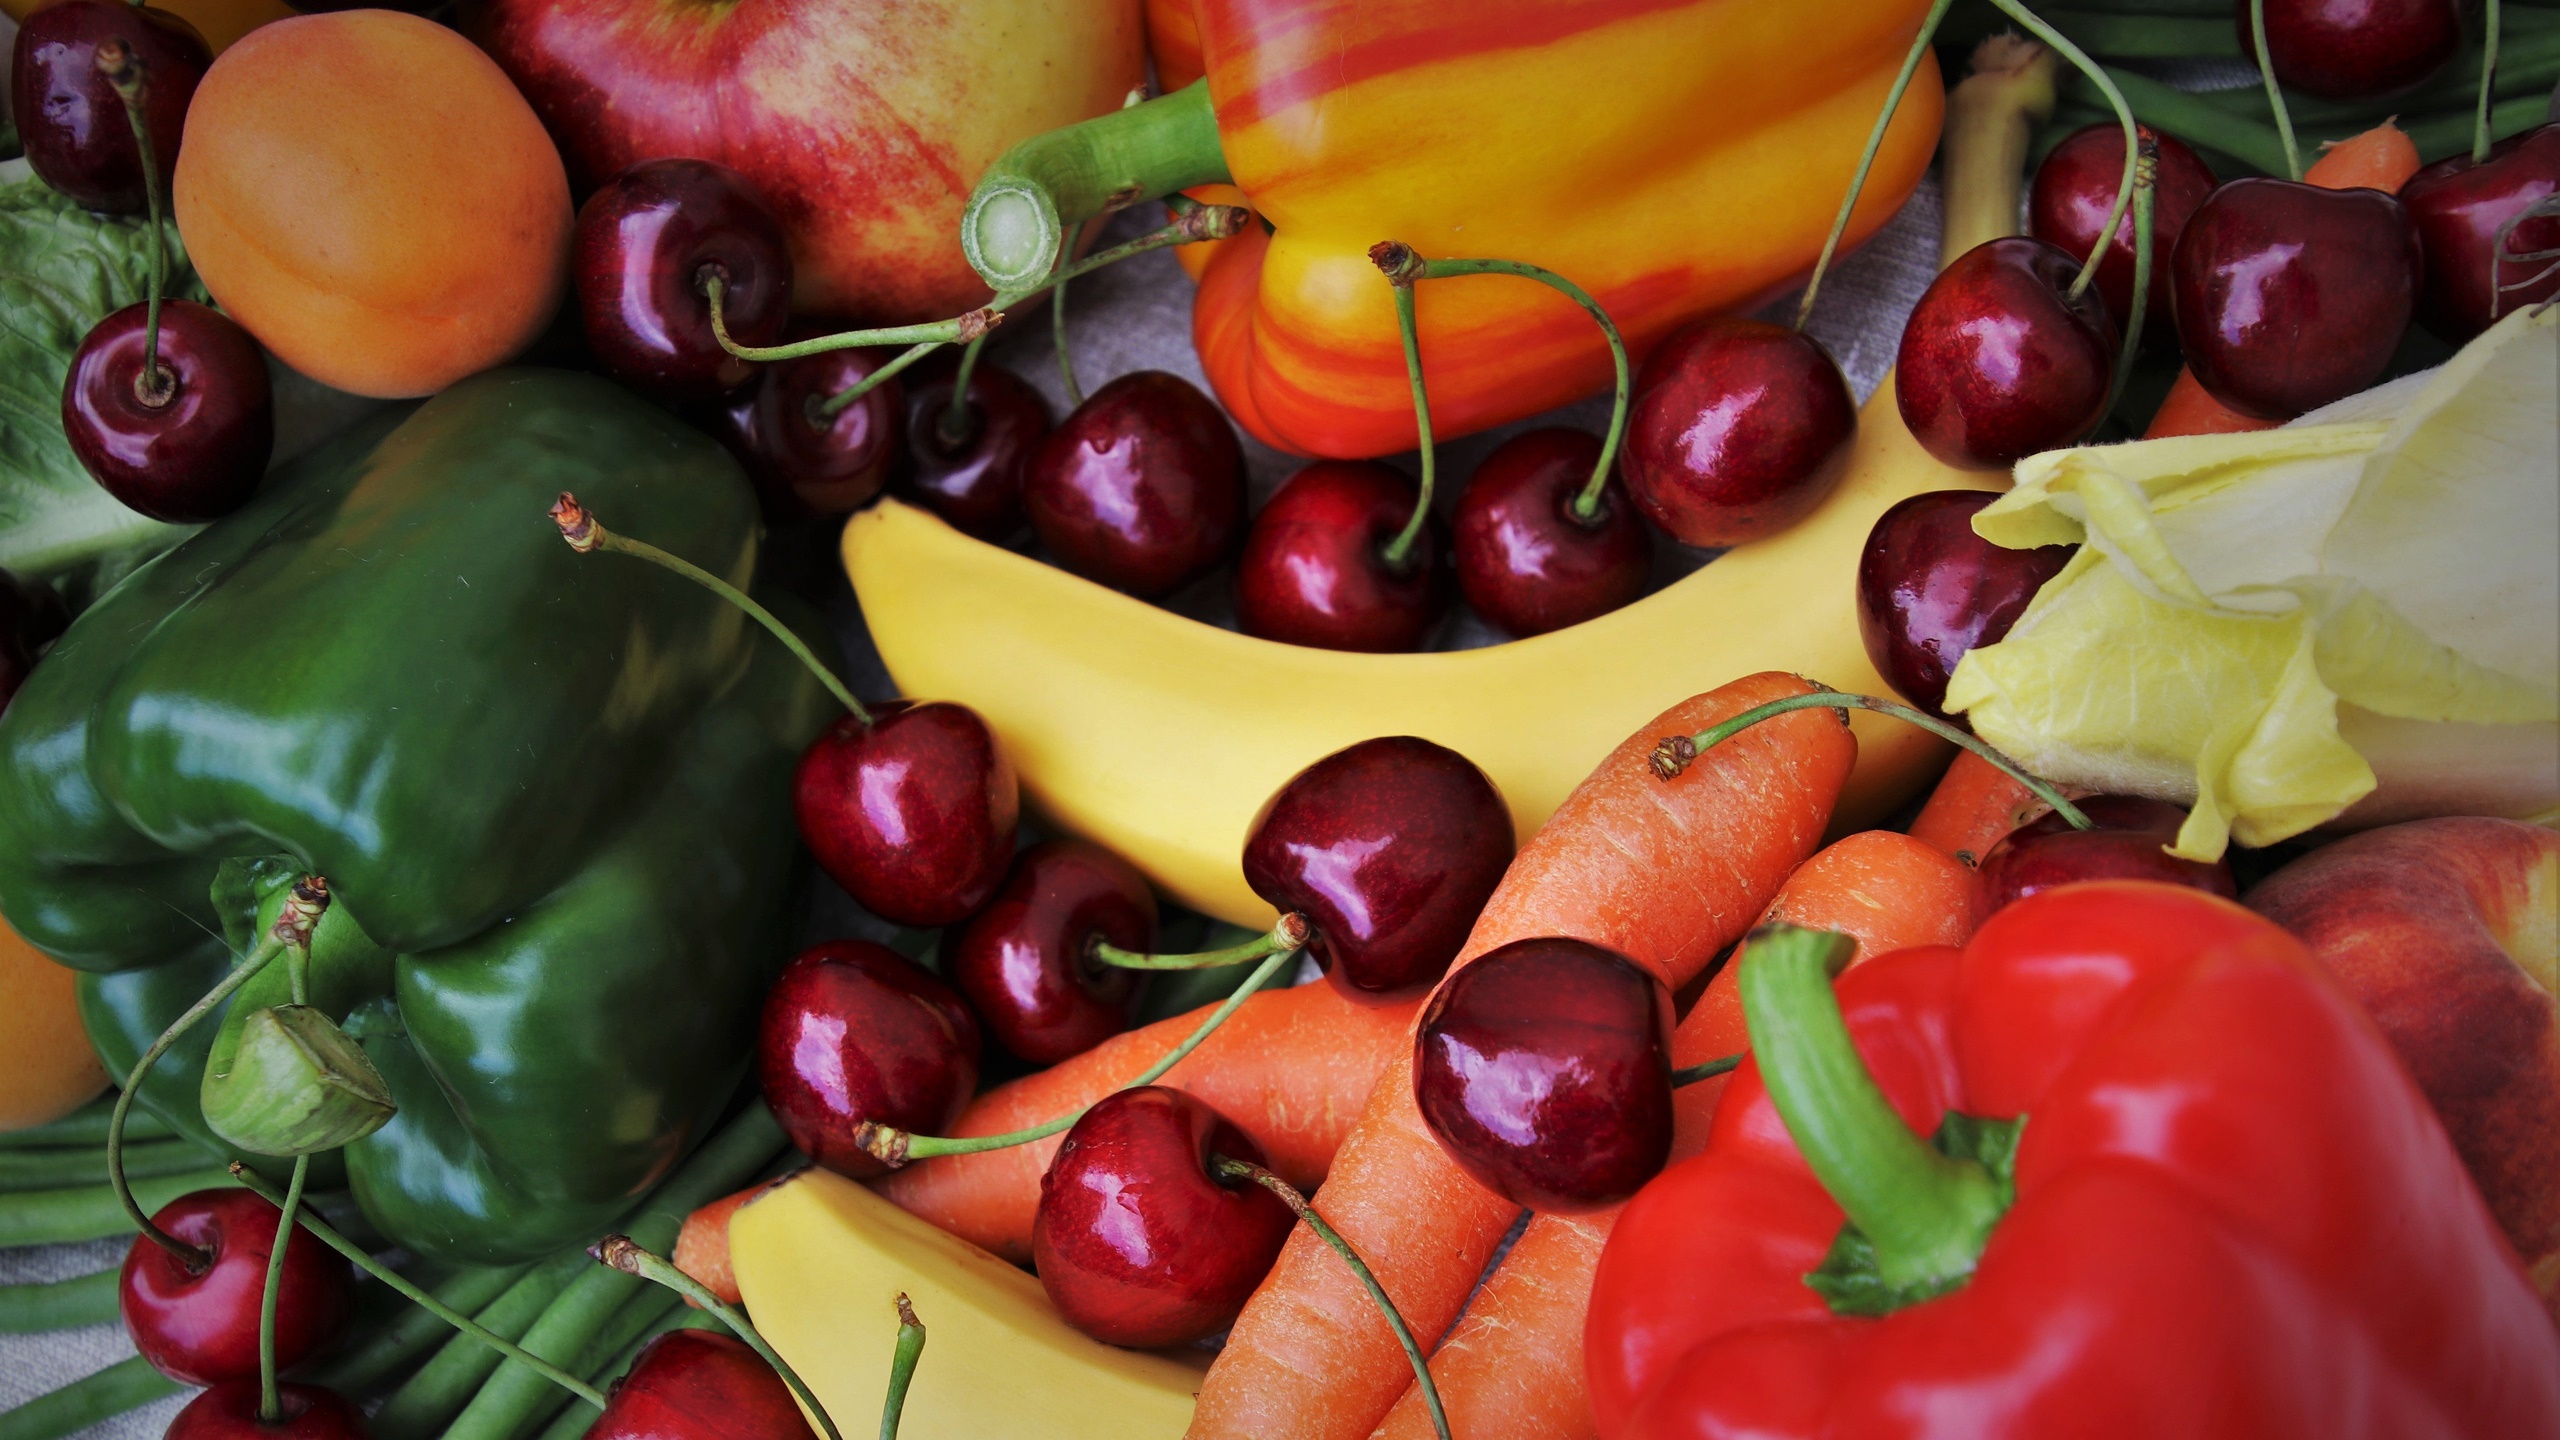 General 2560x1440 vegetables food fruit cherries apricots carrots bell peppers bananas apples lettuce peaches closeup